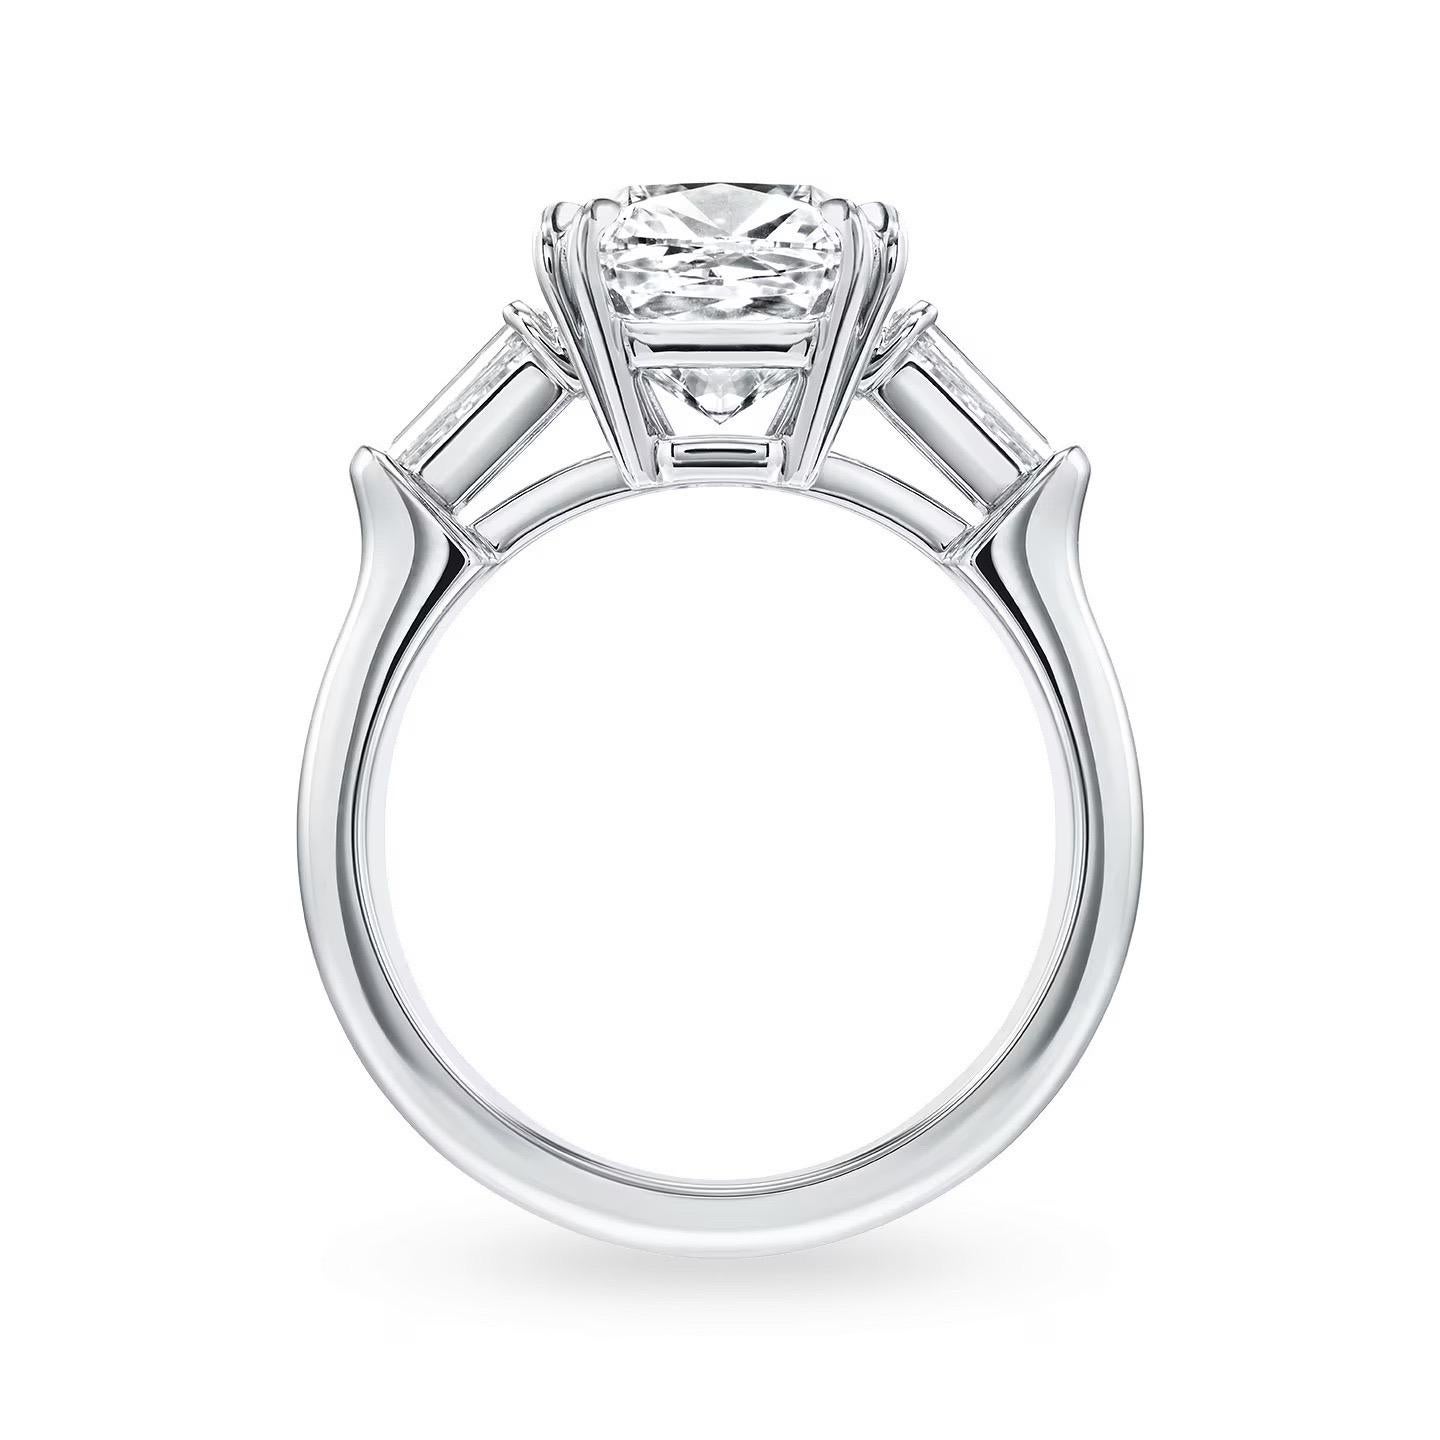 Women's or Men's Beauvince Cushion Cut 3 Stone Engagement Ring (3.02 ct HVS1 GIA Diamond) For Sale